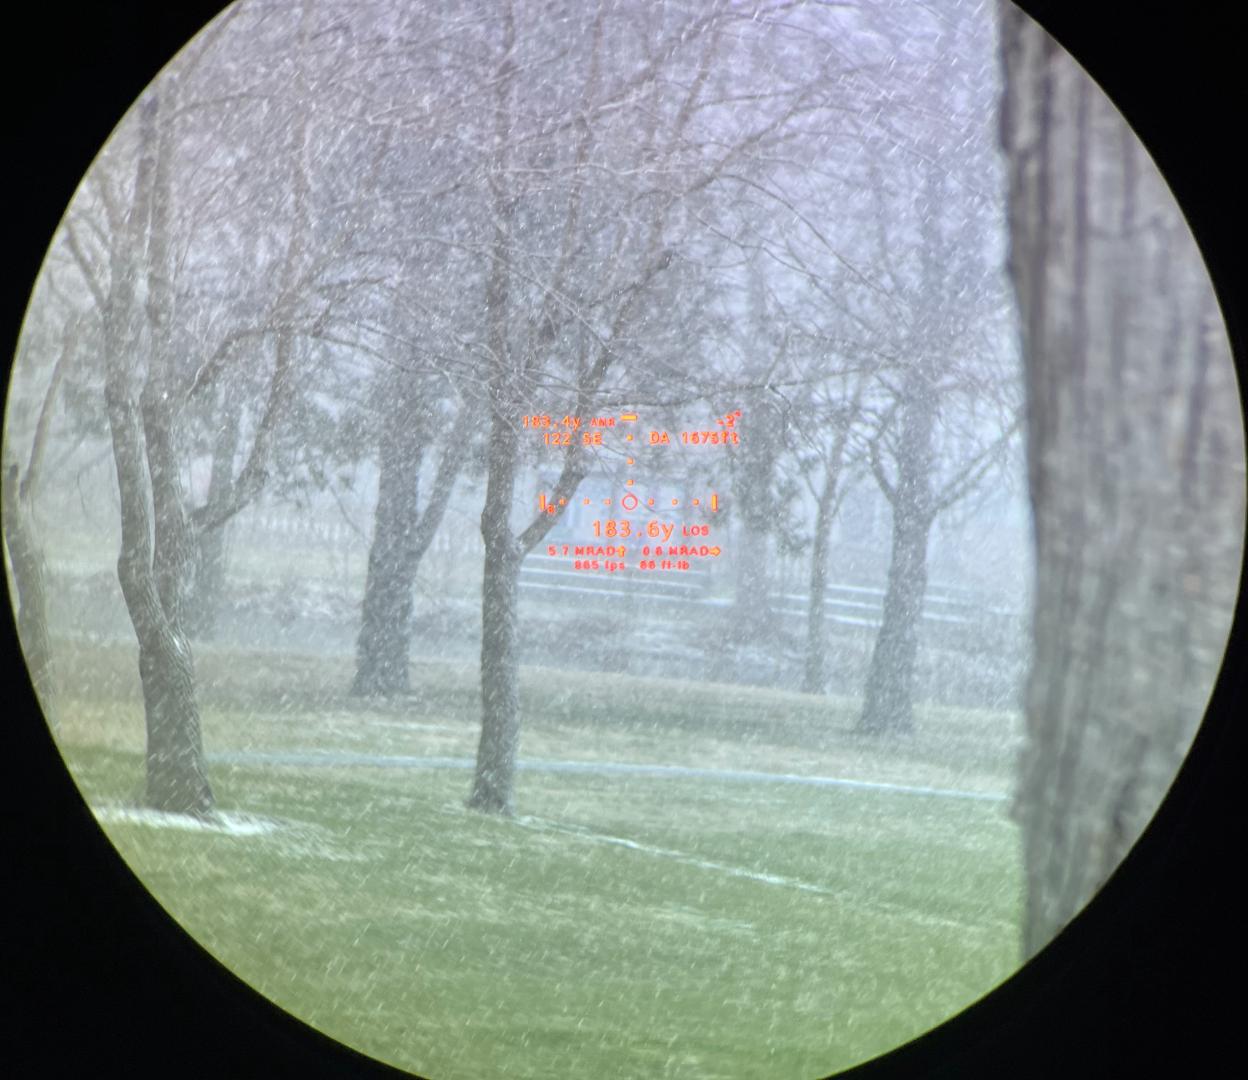 Sig 10k’s in fog mode ranging an outdoor display board in moderate snow.